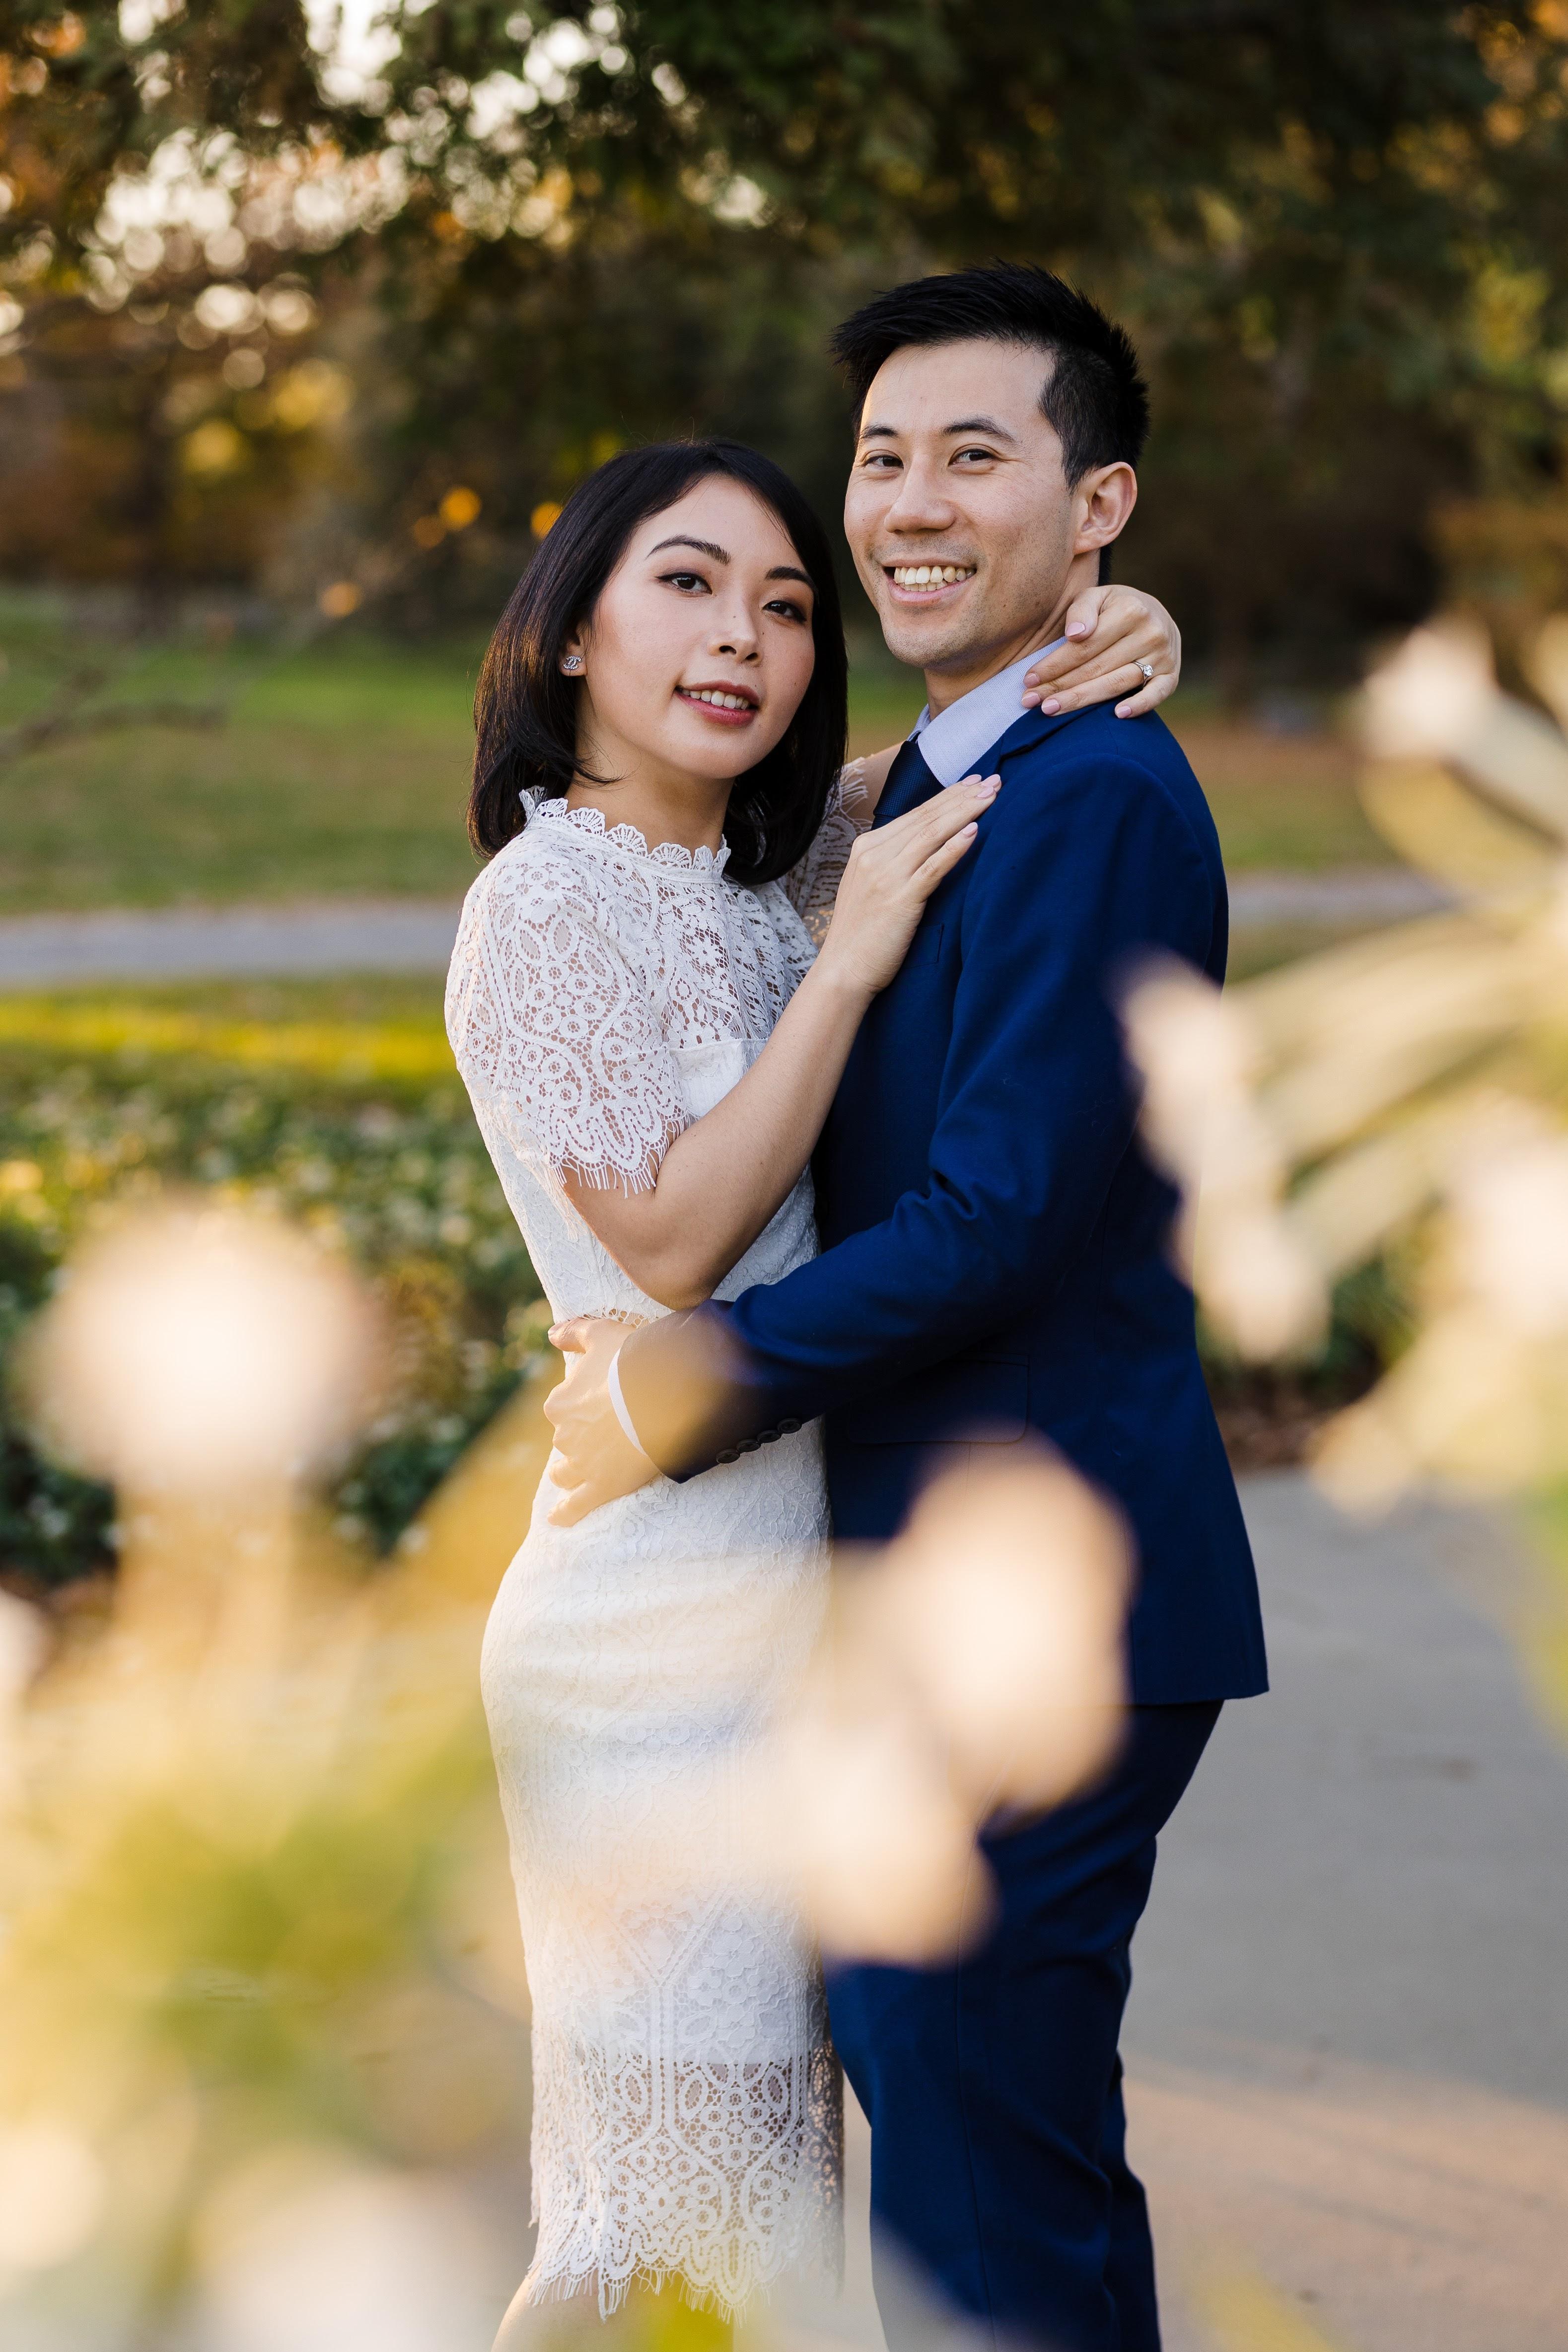 The Wedding Website of Leon Chung and Thy Pham